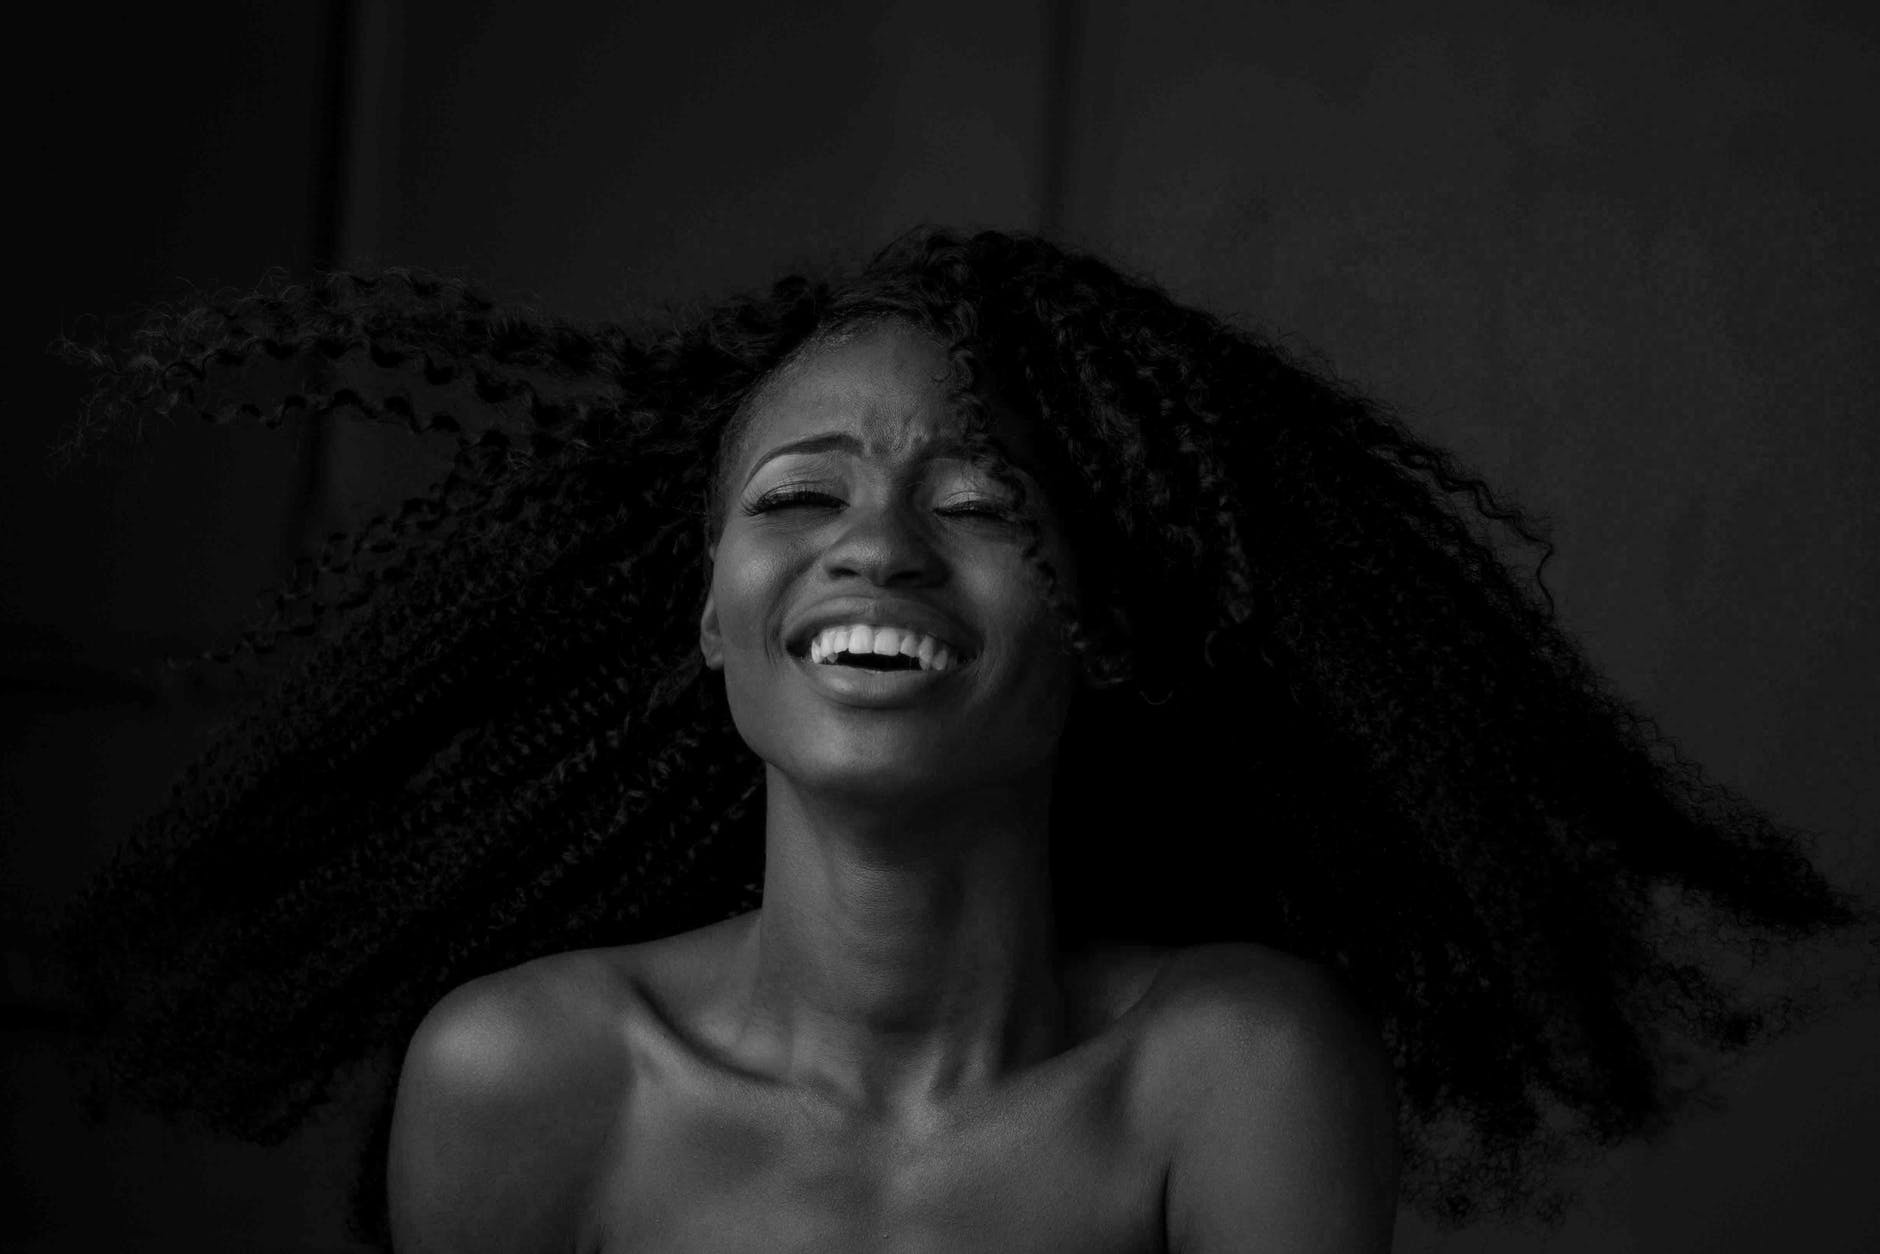 grayscale photography of smiling woman - benefits of laughing